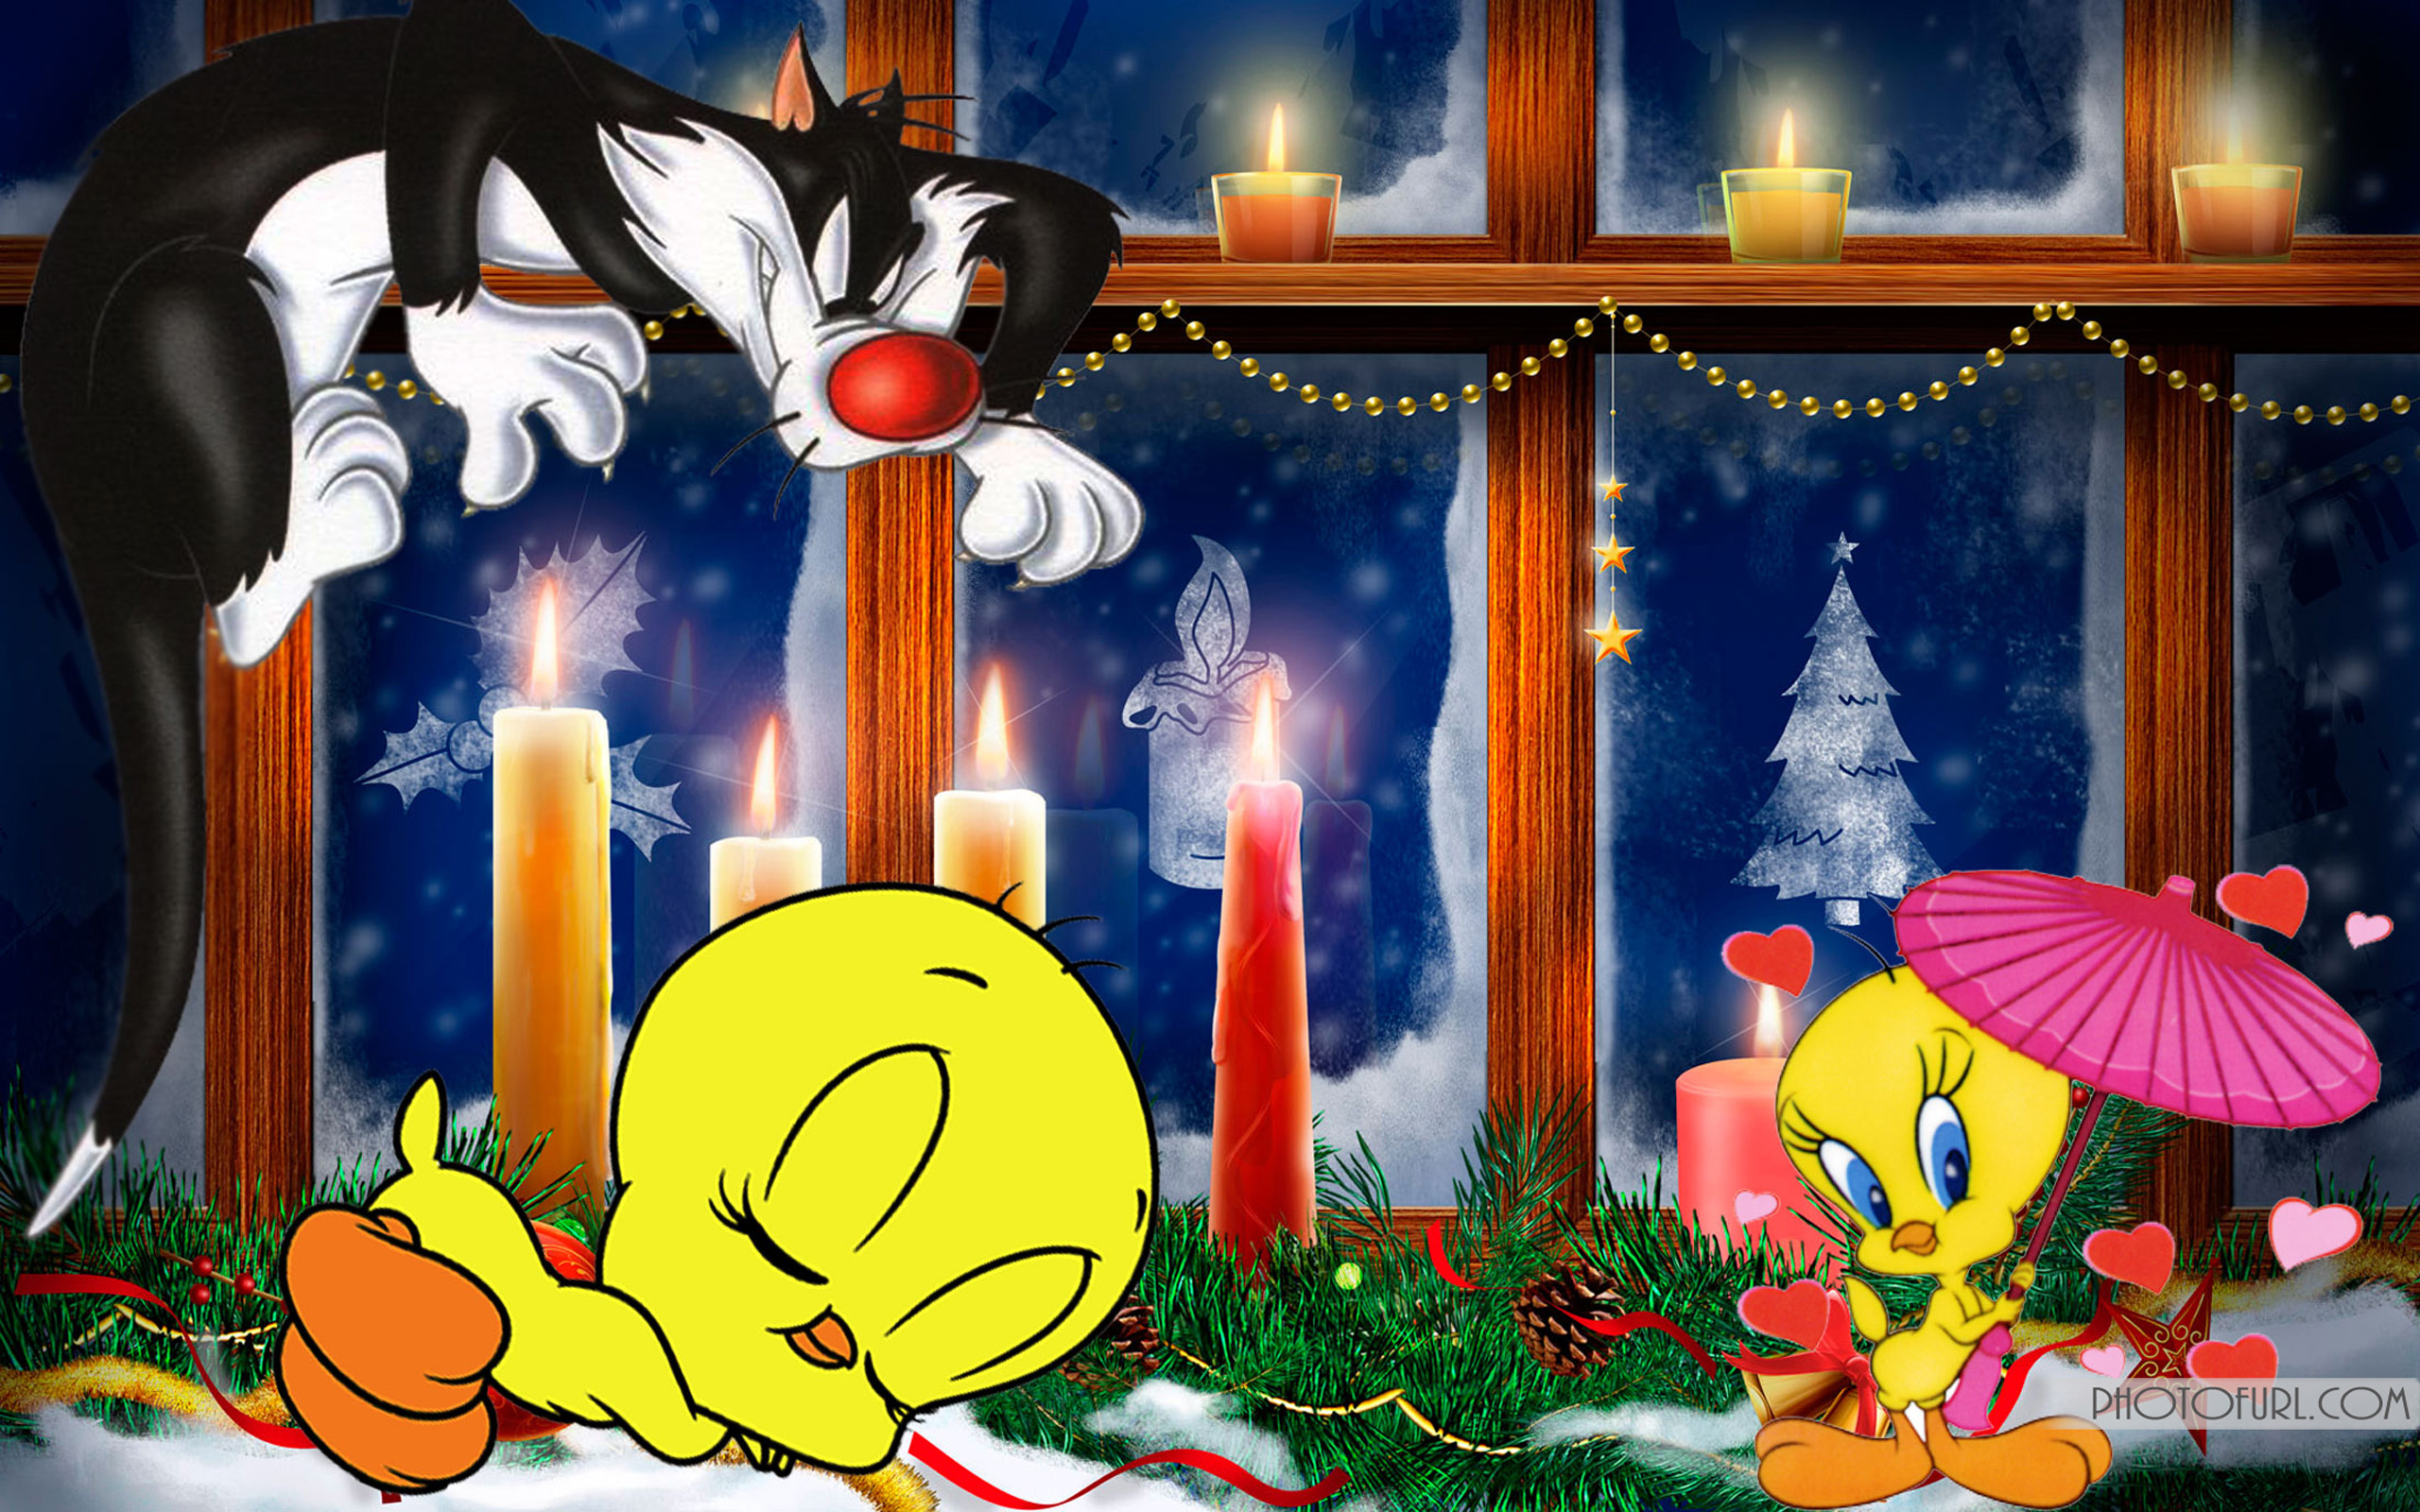 2560x1600 Looney Tunes Tweety Bird And Sylvester Cat Christmas Candles Cartoons Hd Wallpaper For Mobile Phones Tablet And Pc :